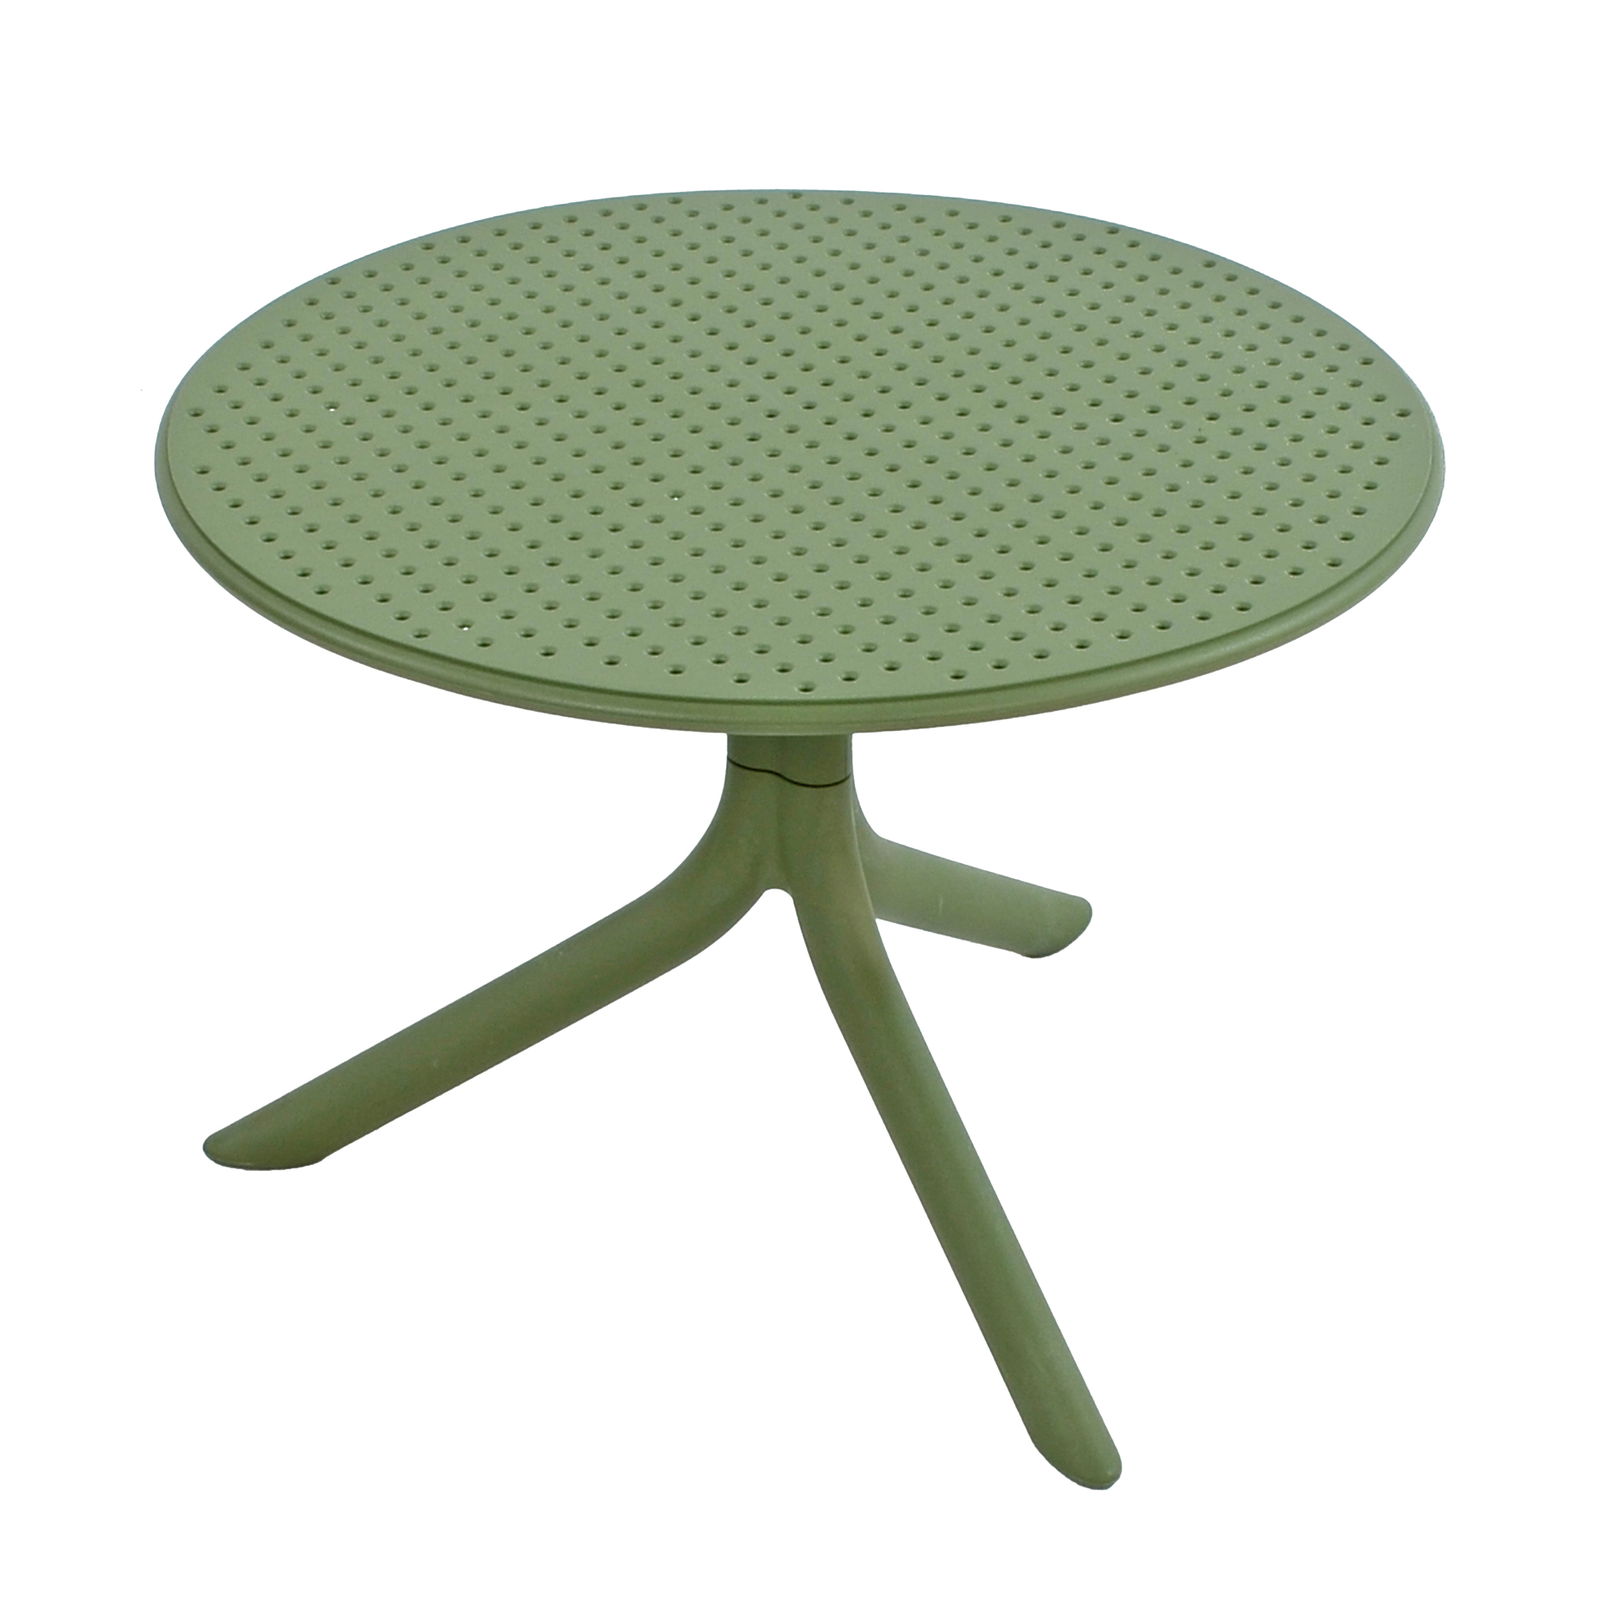 Nardi Step Adjustable Table With 2 Bistrot Chair Set in Olive Green Dining Sets Nardi   